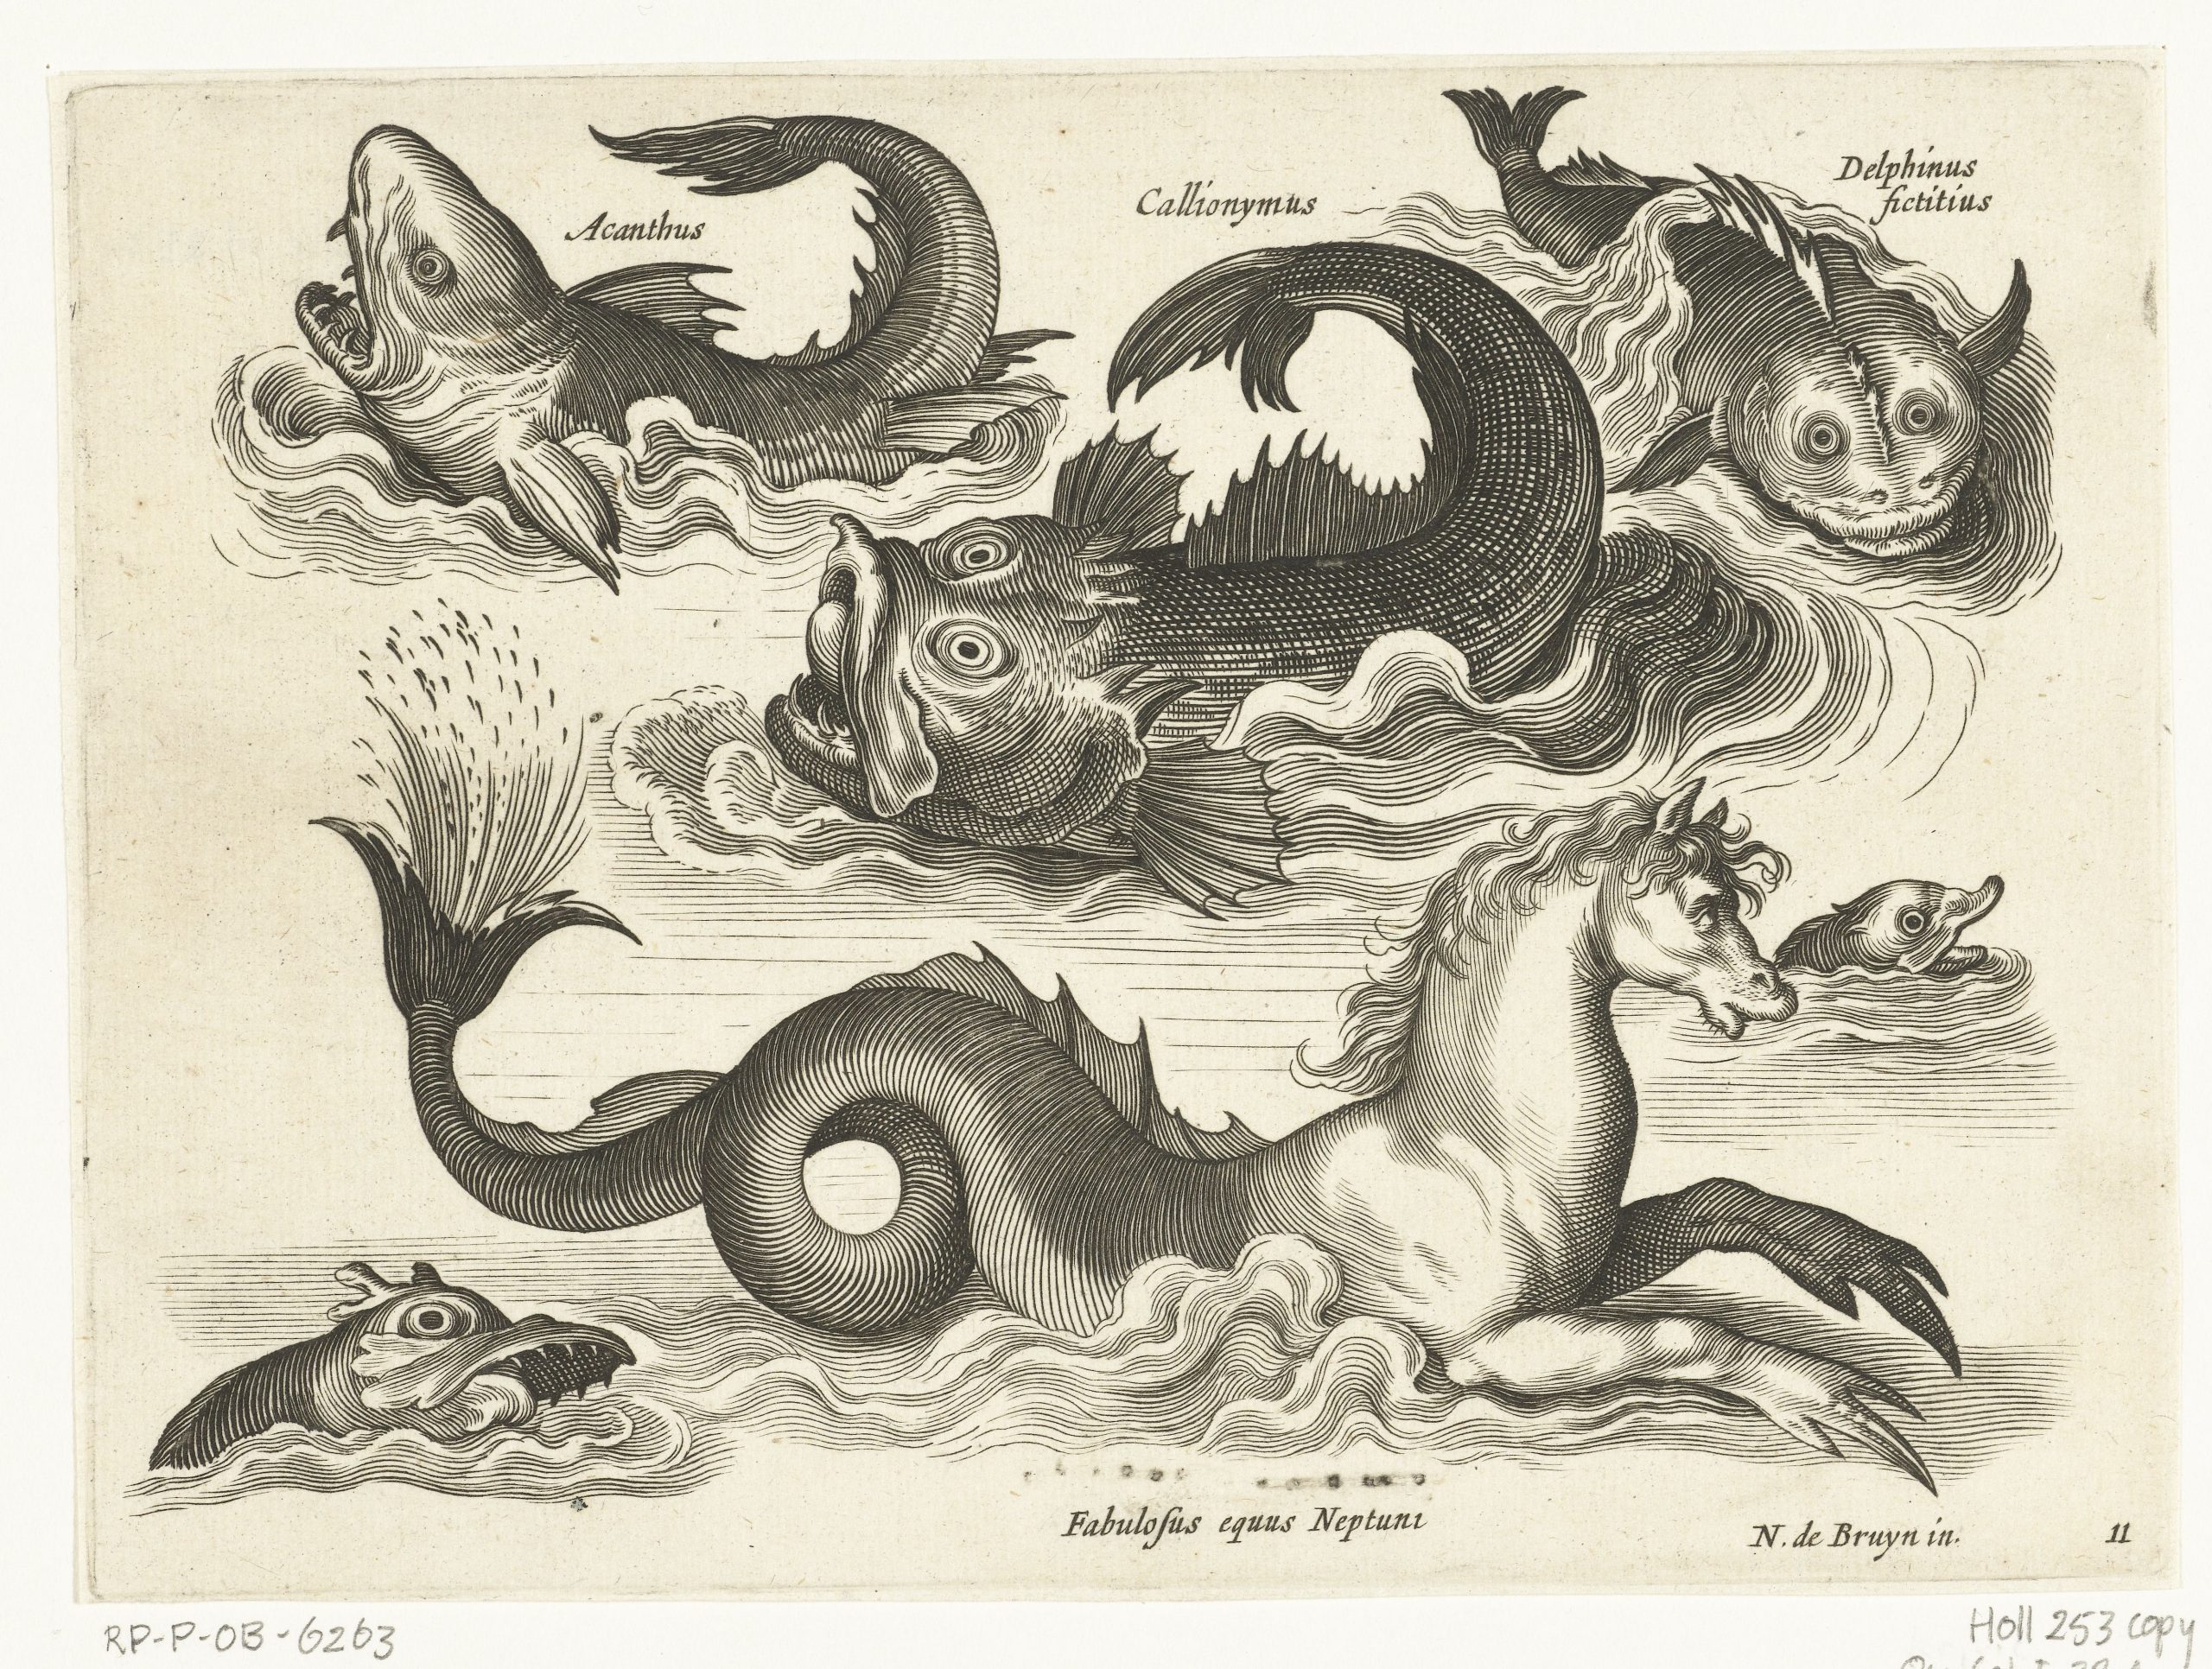 Several sketches of various water creatures.